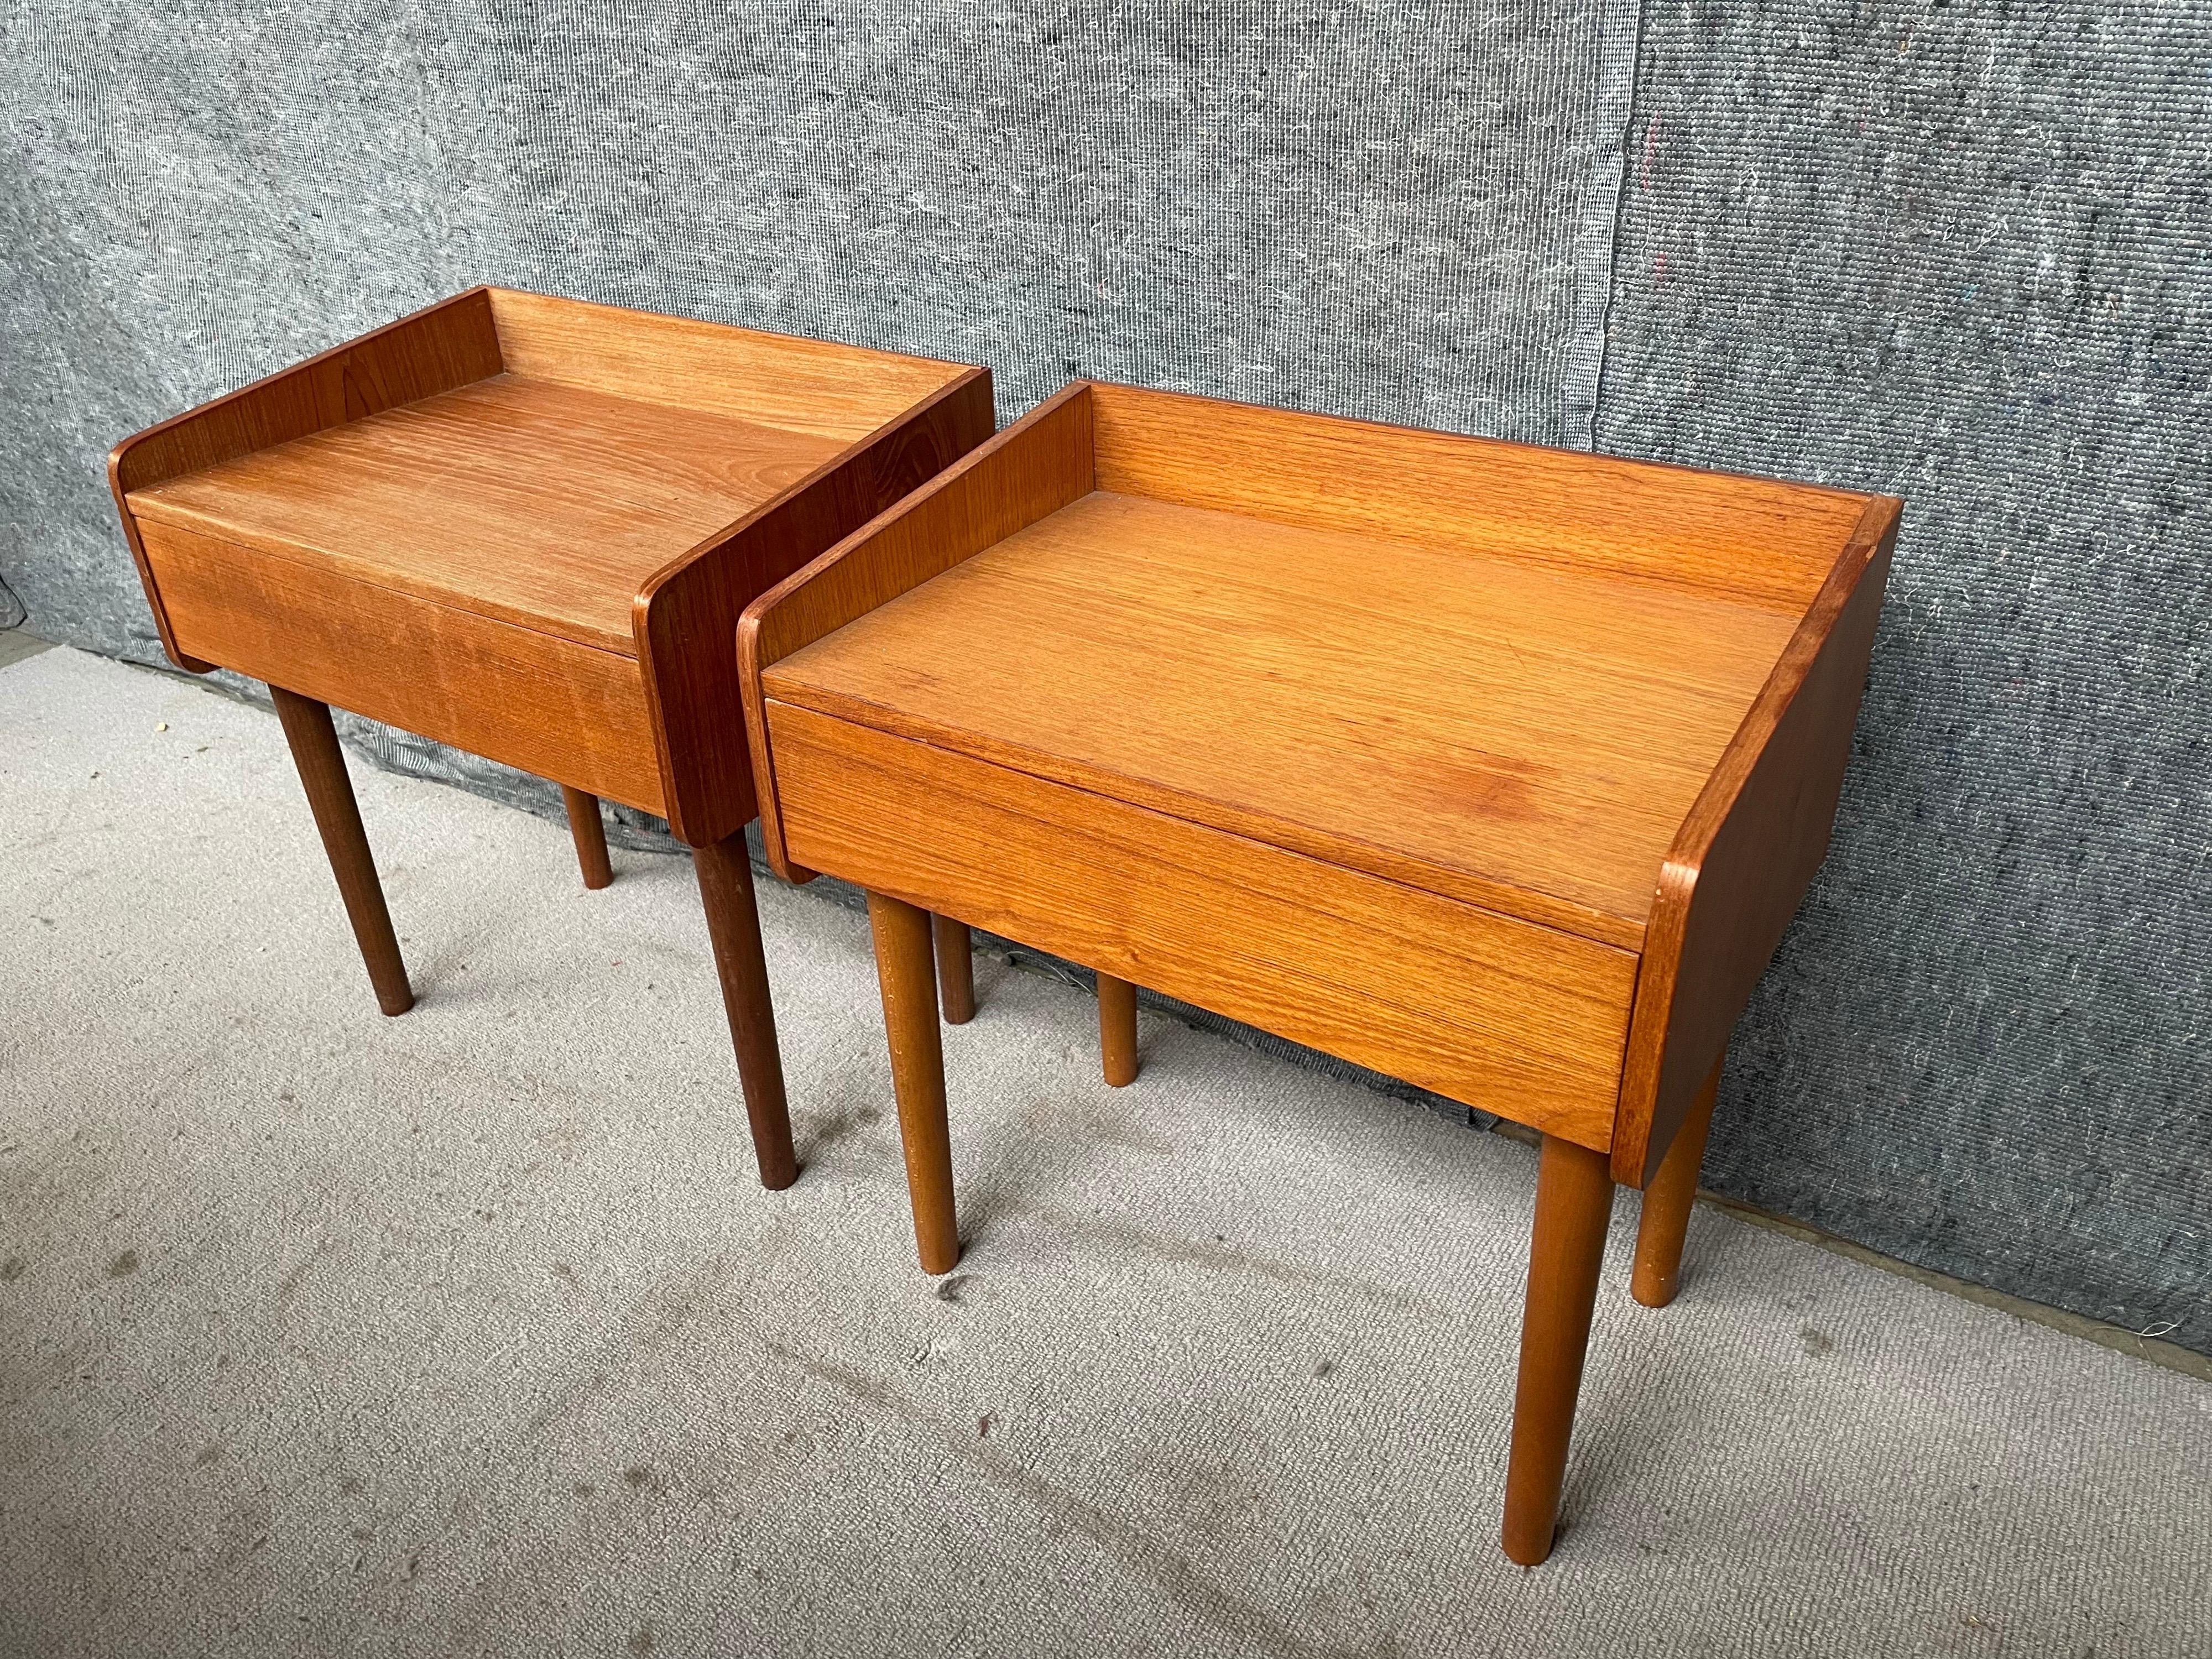 Handsome pair of Danish modern teak midcentury nightstands. A single pullout drawer provides storage for items.